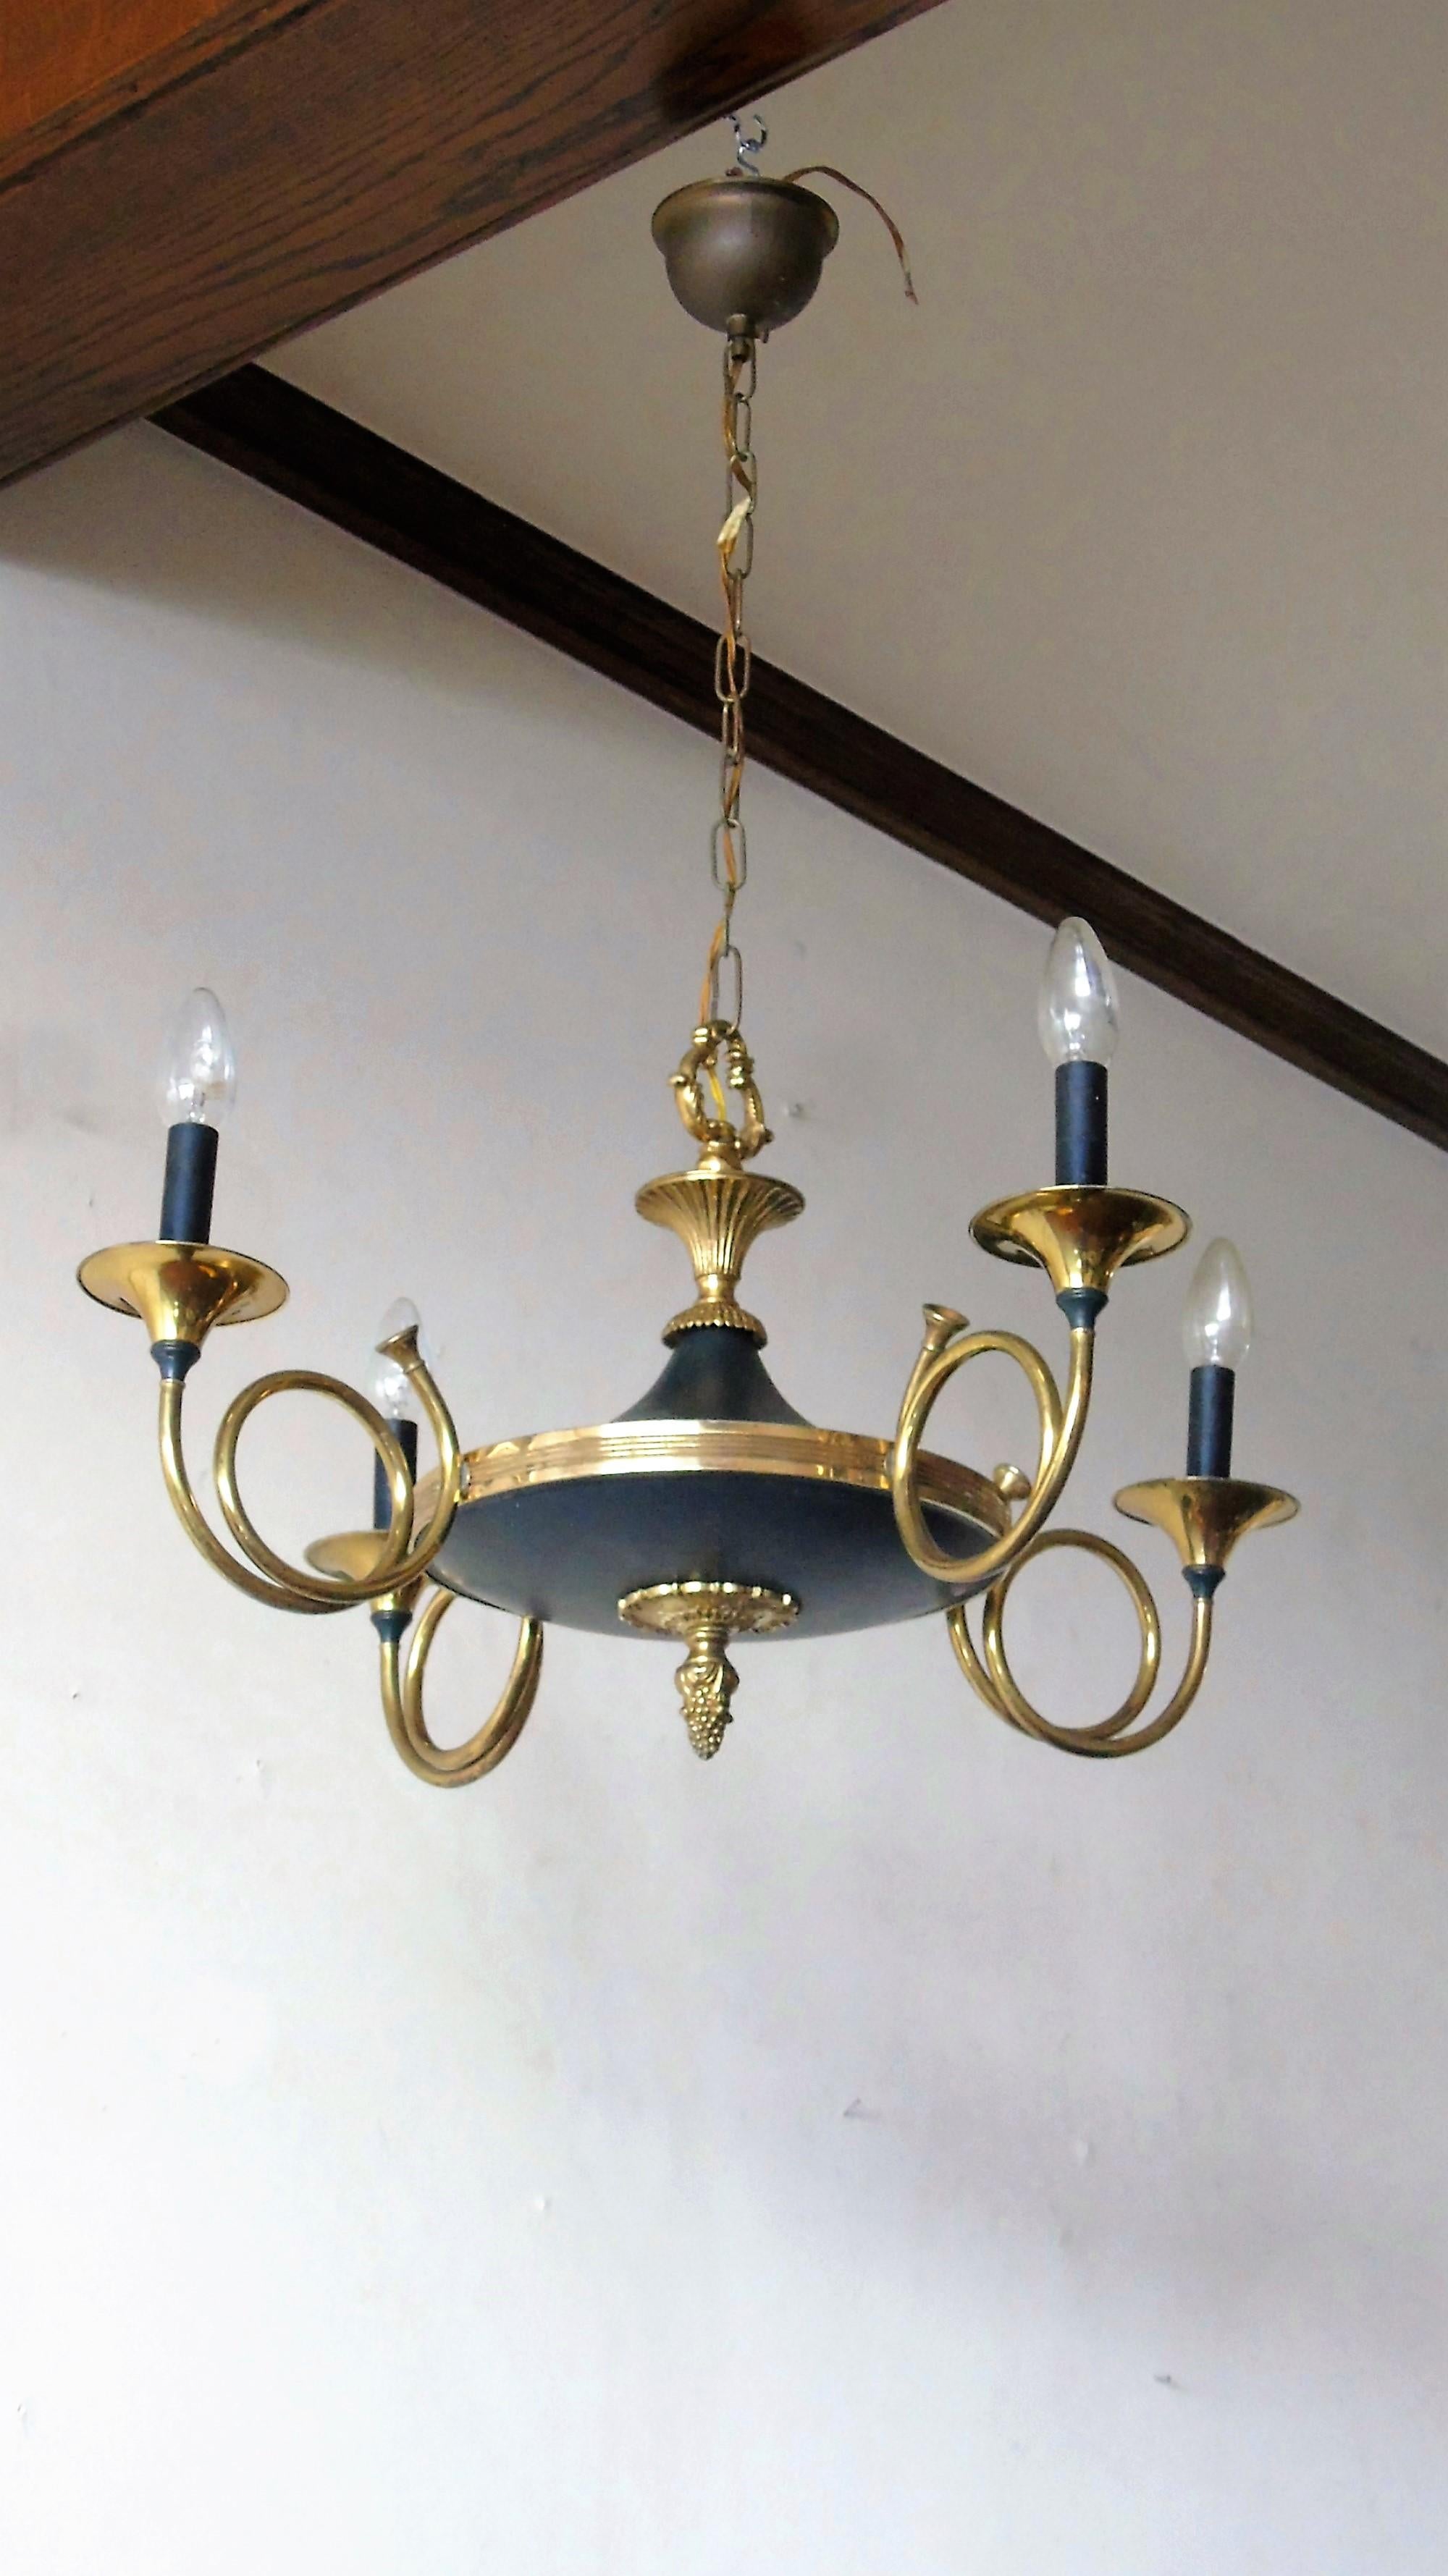 Brass four arm 'hunting horn' shaped chandelier made by Maison Baguès with an ormolu finial.

This classical chandelier is in a good, slight patinated condition.

Fully working light fixture with four regular E14 light sockets.

1940s,